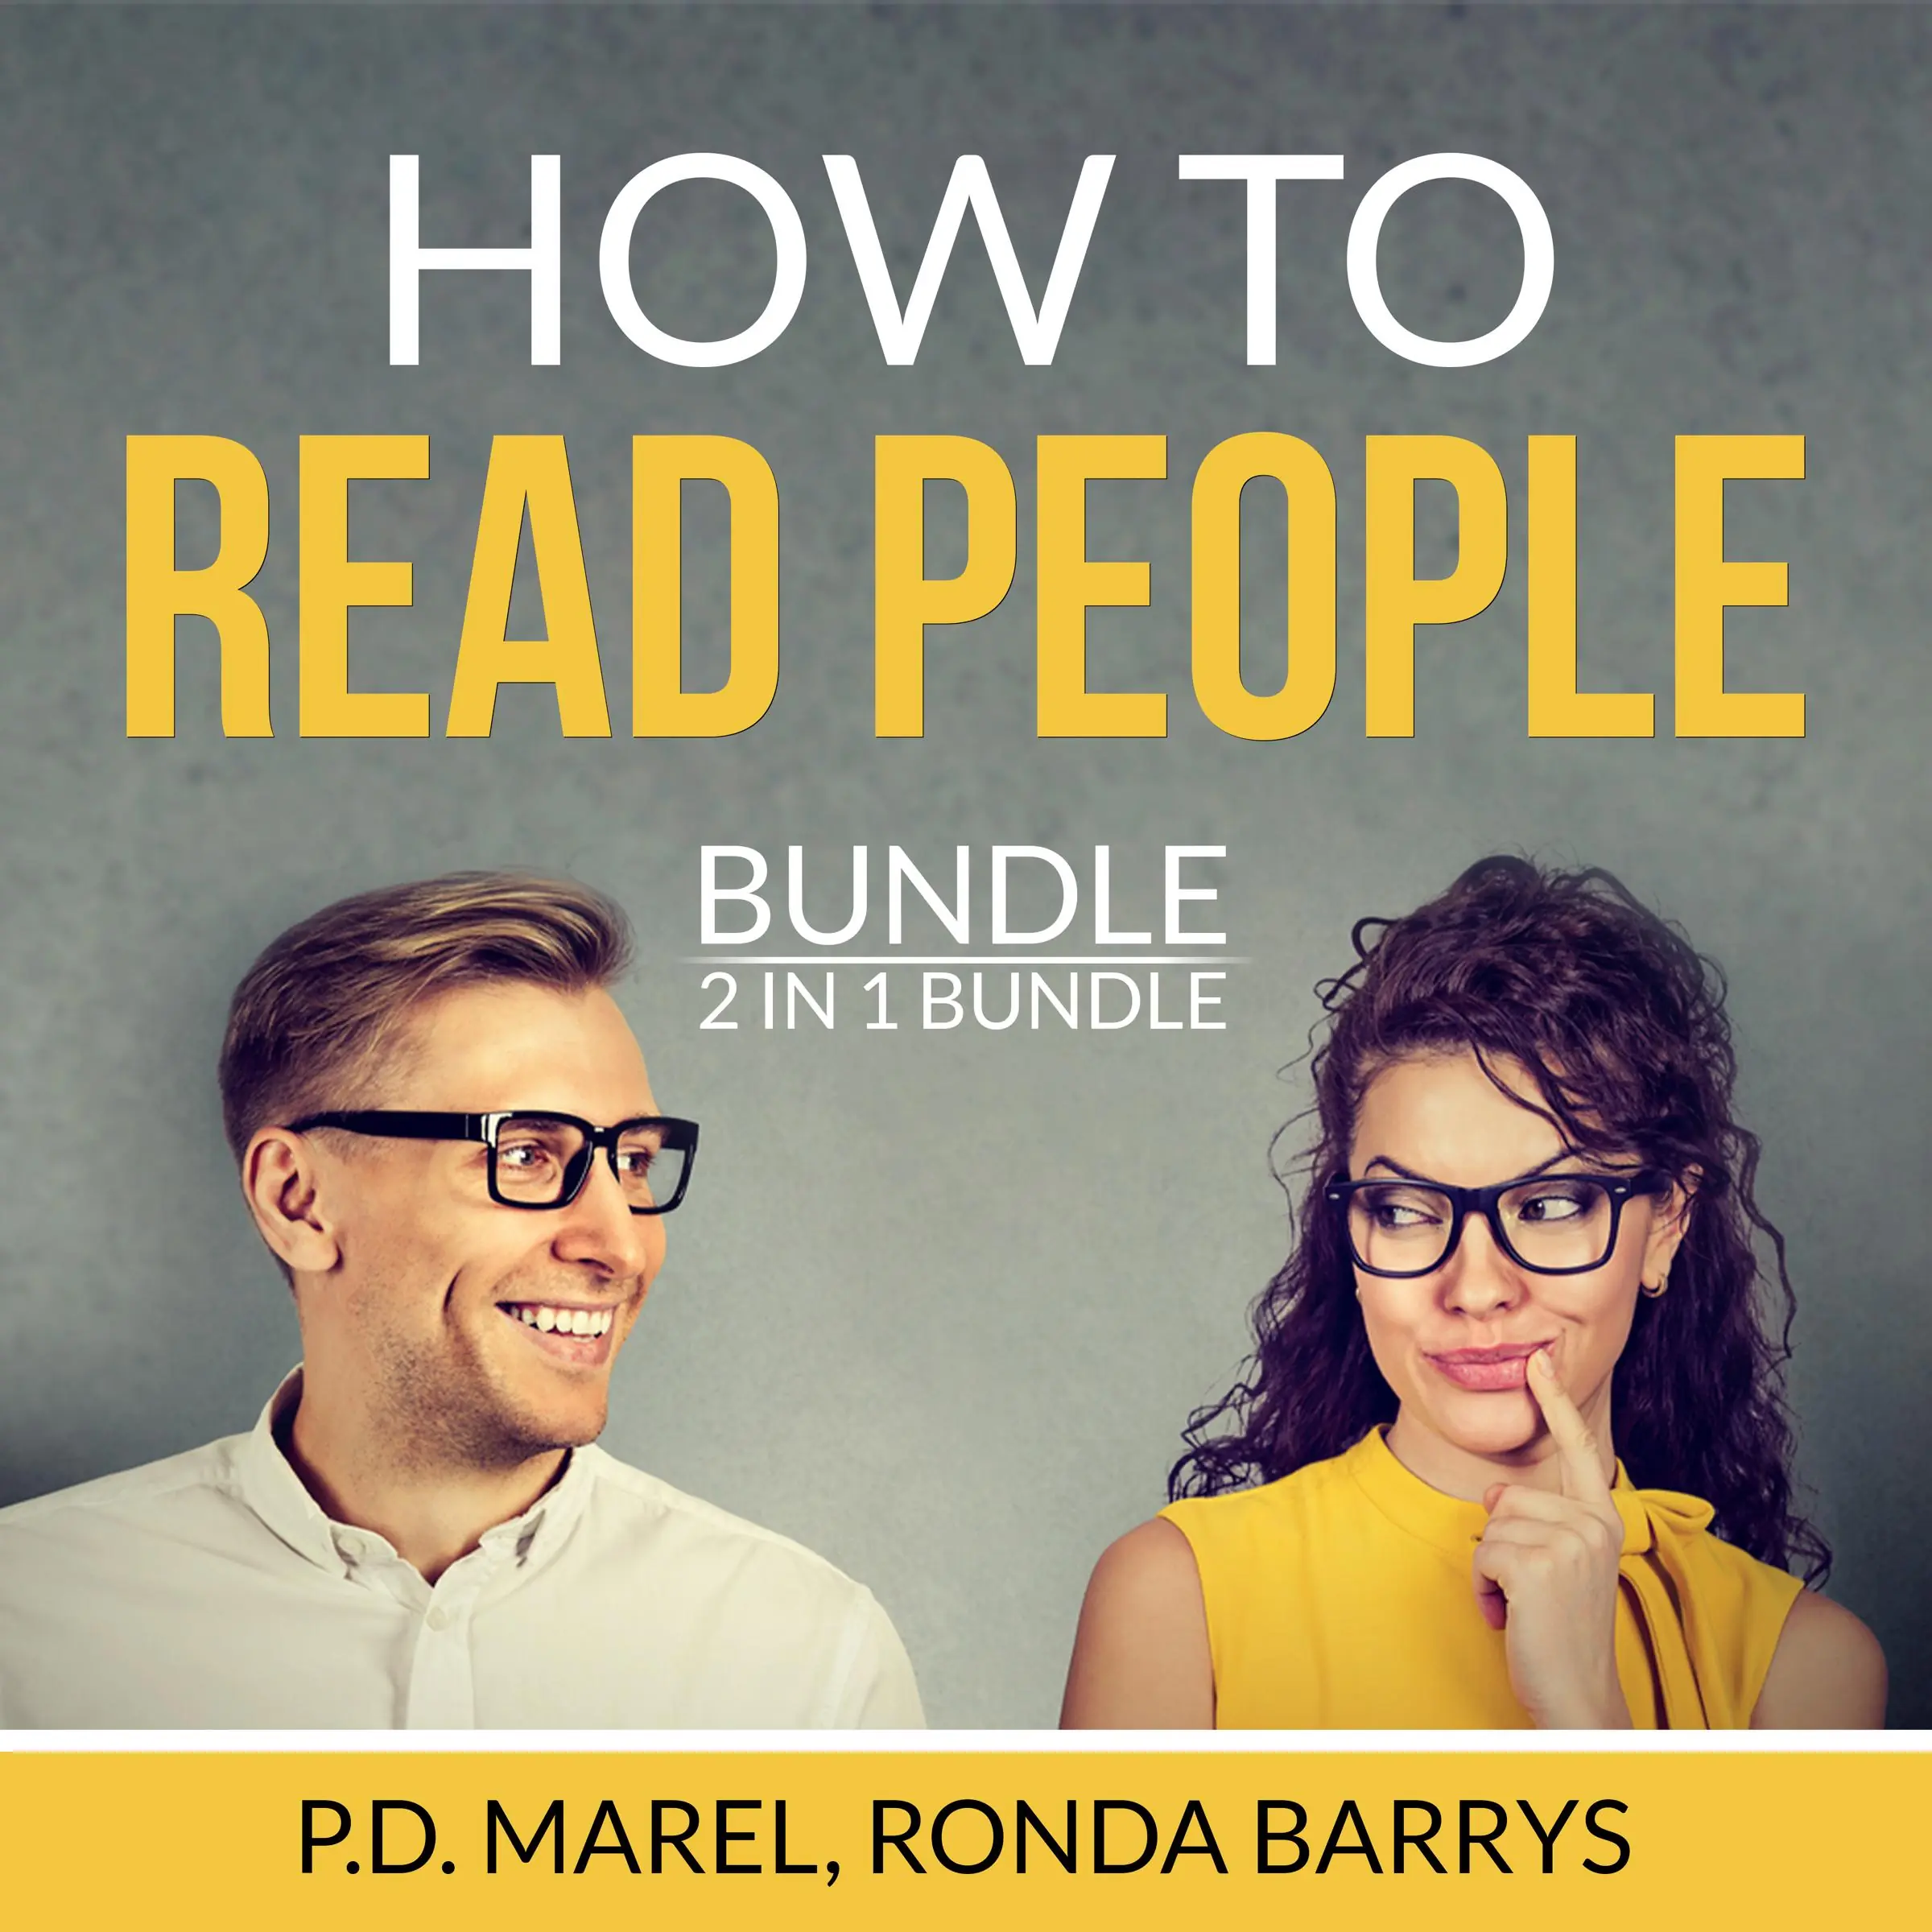 How to Read People Bundle, 2 in 1 Bundle: The Dictionary of Body Language and Art of Reading People Audiobook by and Ronda Barrys